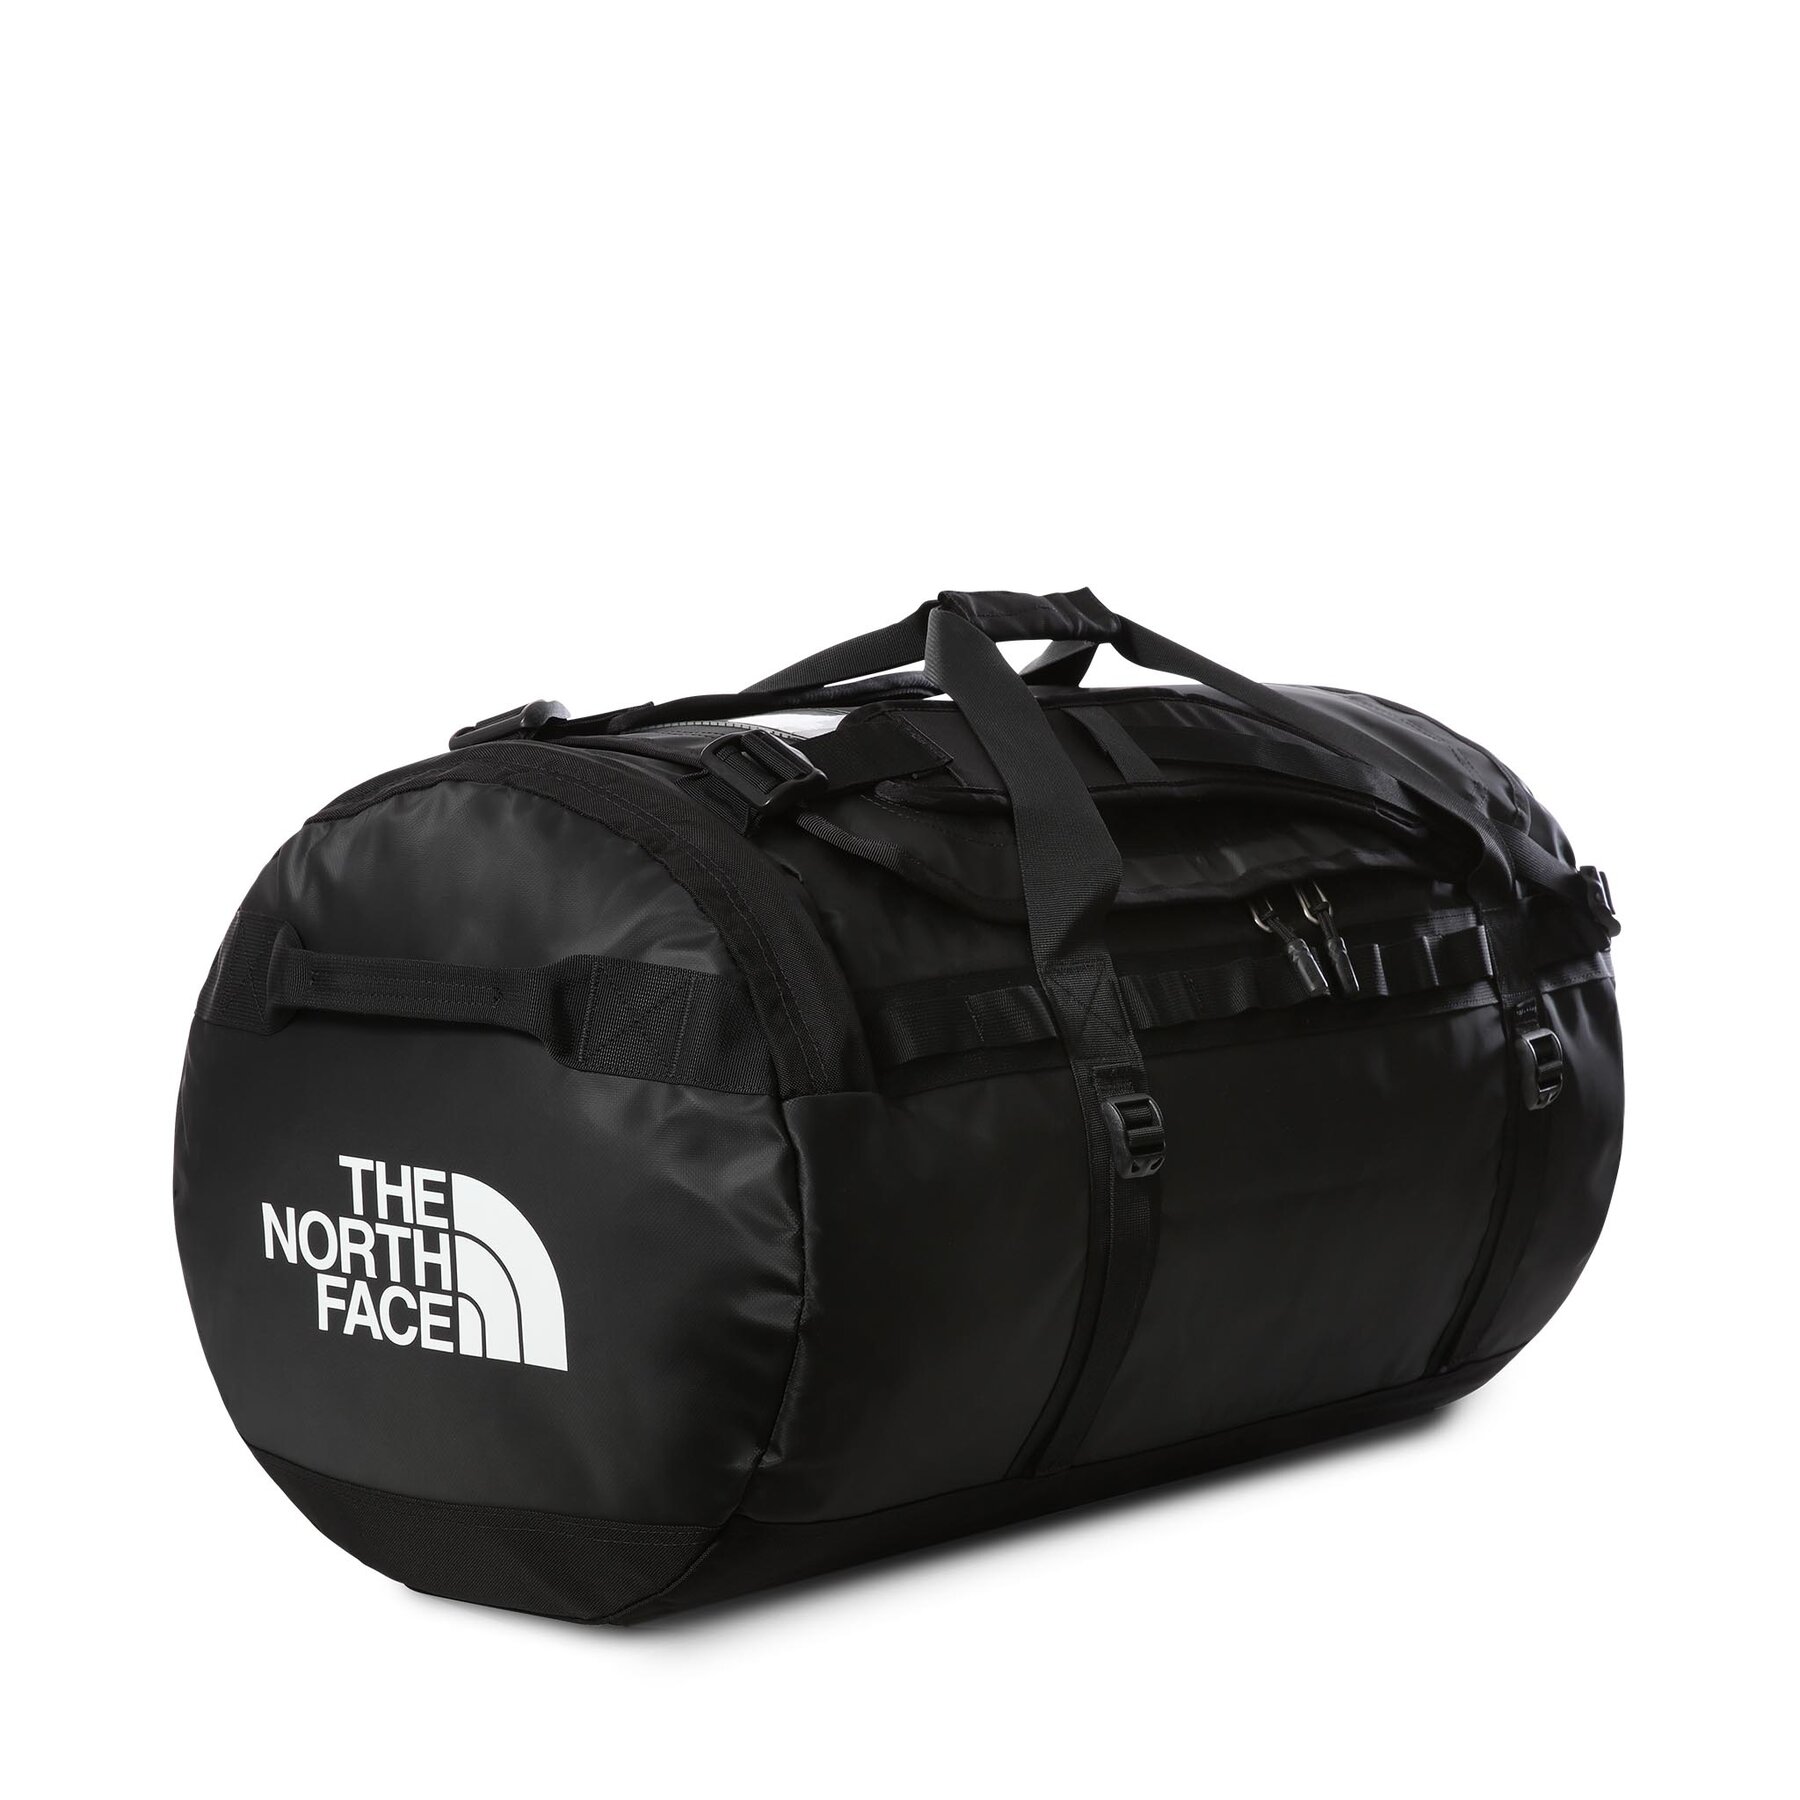 Tasche The North Face Base Camp Duffel NF0A52SBKY41 Tnf Black/Tnf White von The North Face